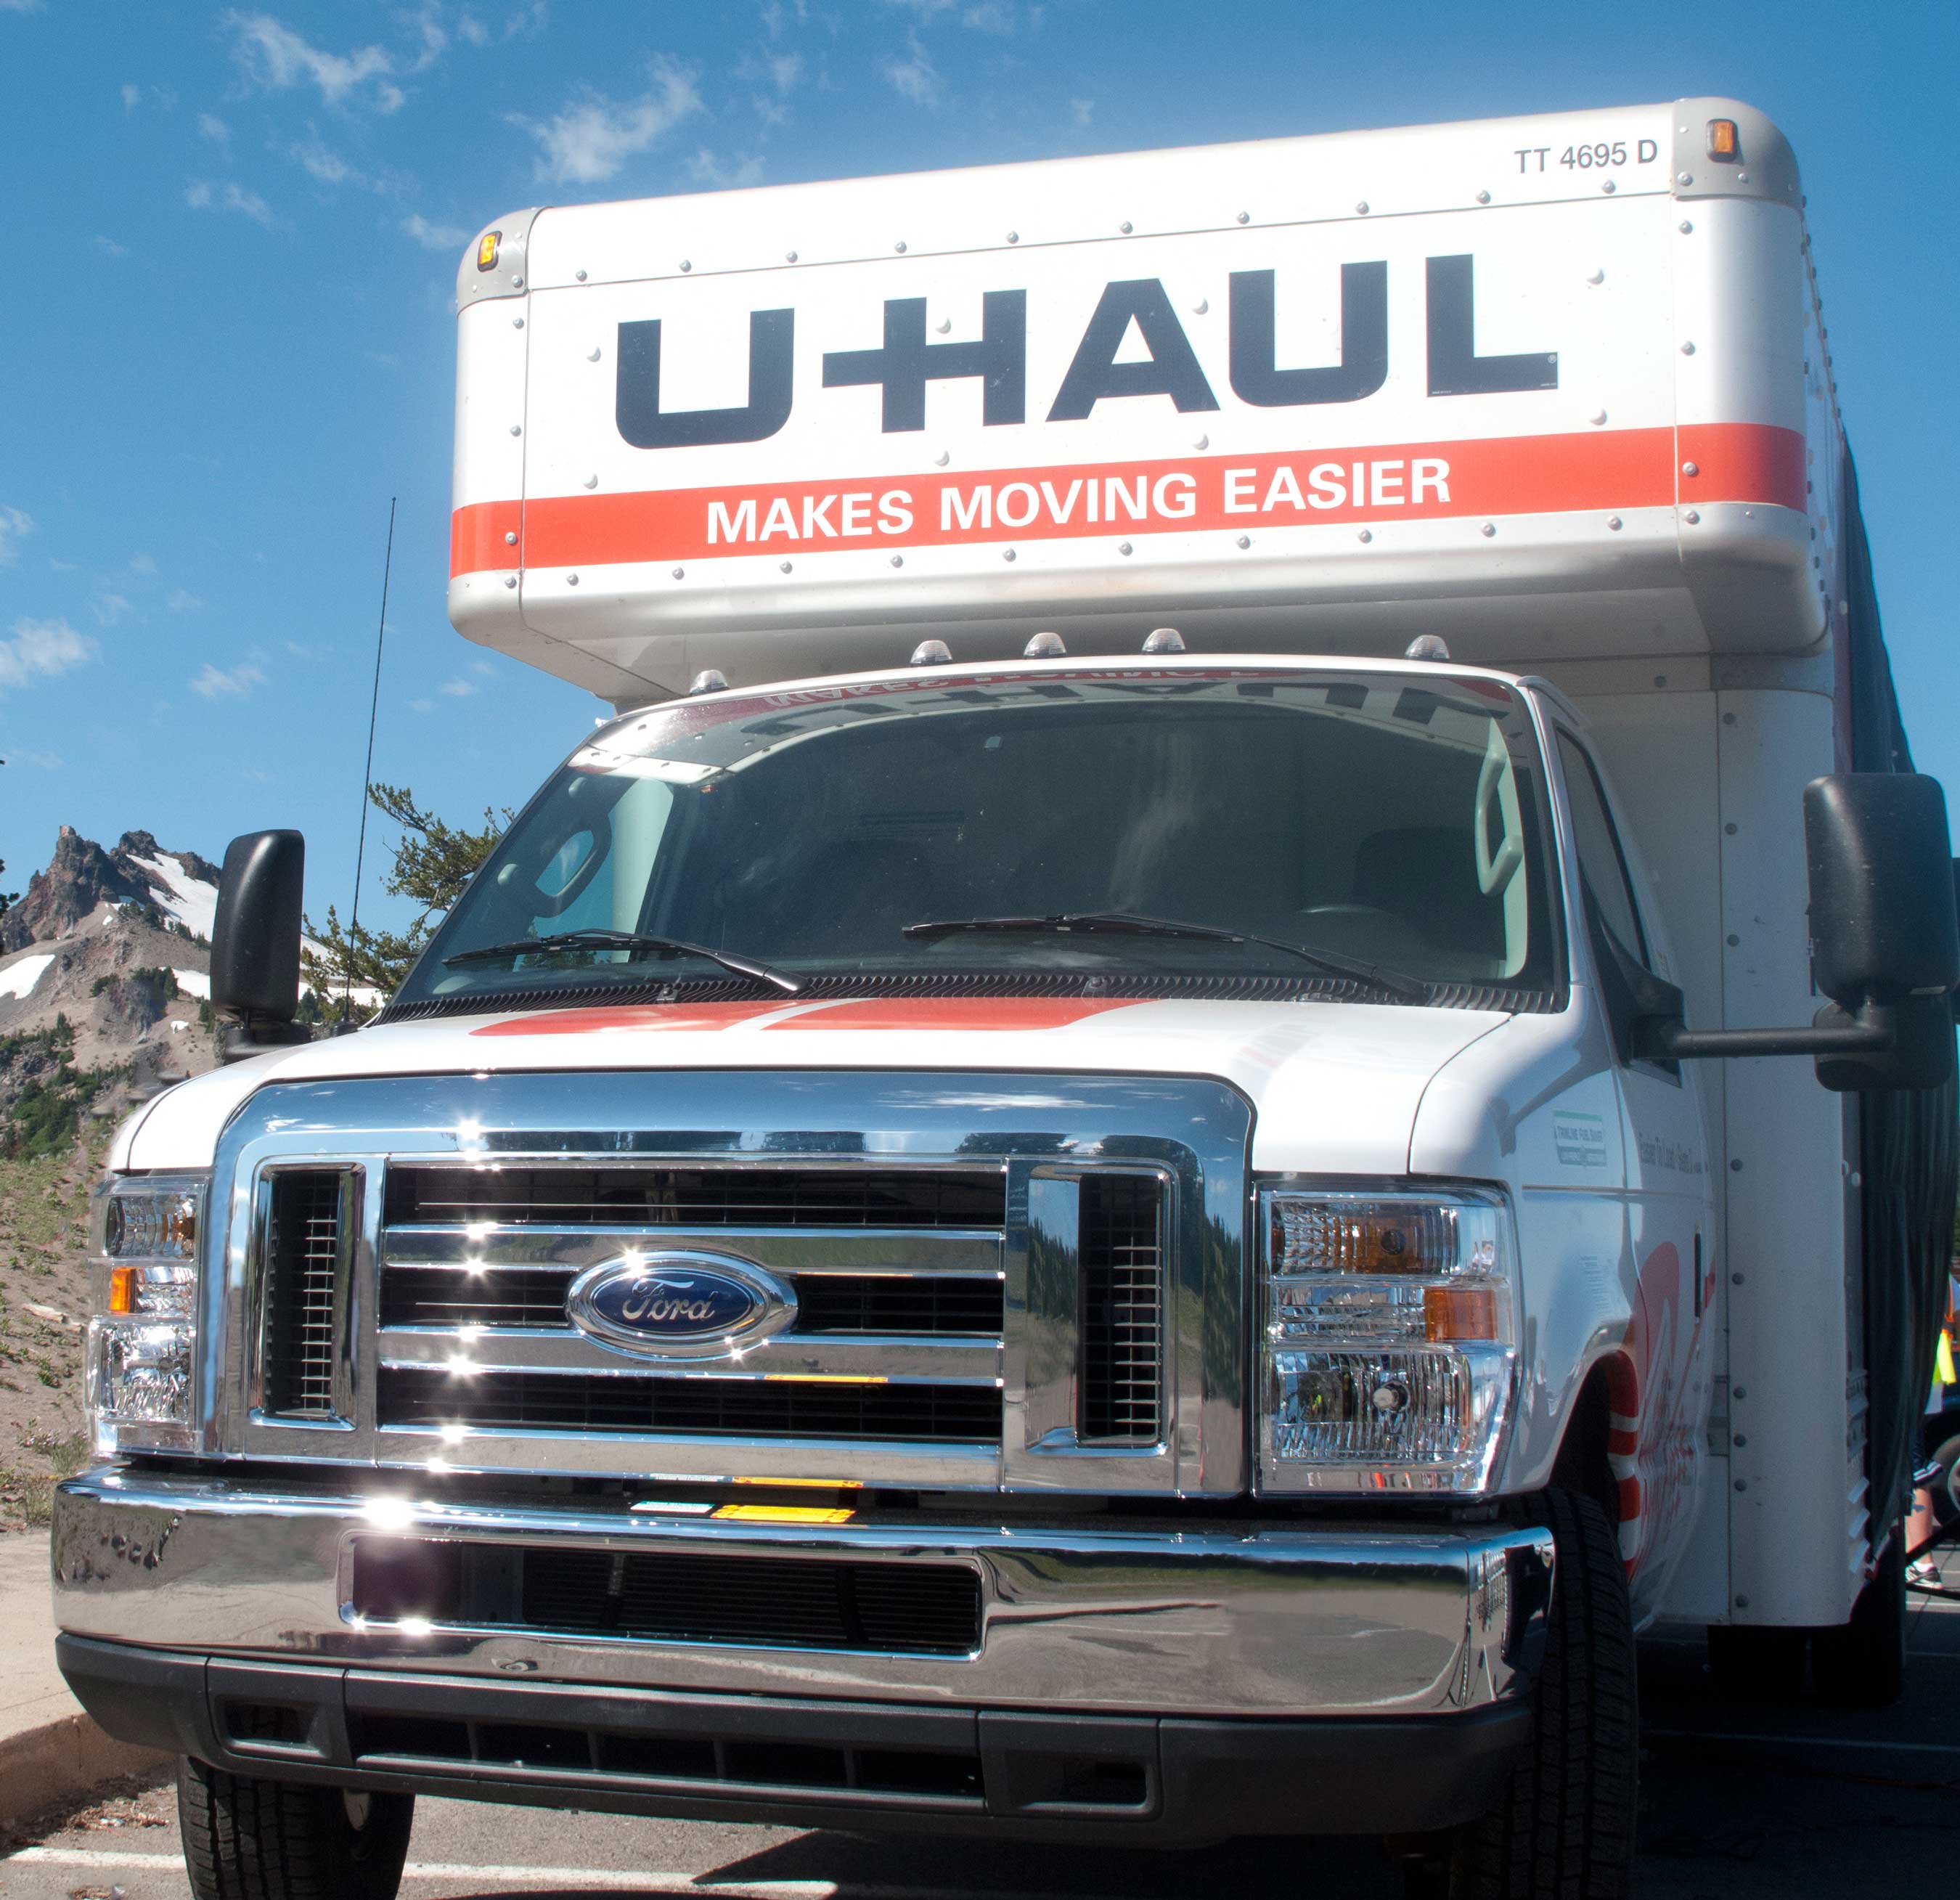 Keep on Truckin’: From cargo vans to our 26-foot hauler, our vast line of efficient vehicles offers an answer for every move. The Mom’s Attic® storage above the cab and our extra-wide EZ-Load Ramps® are just two features exclusive to the U-Haul fleet.